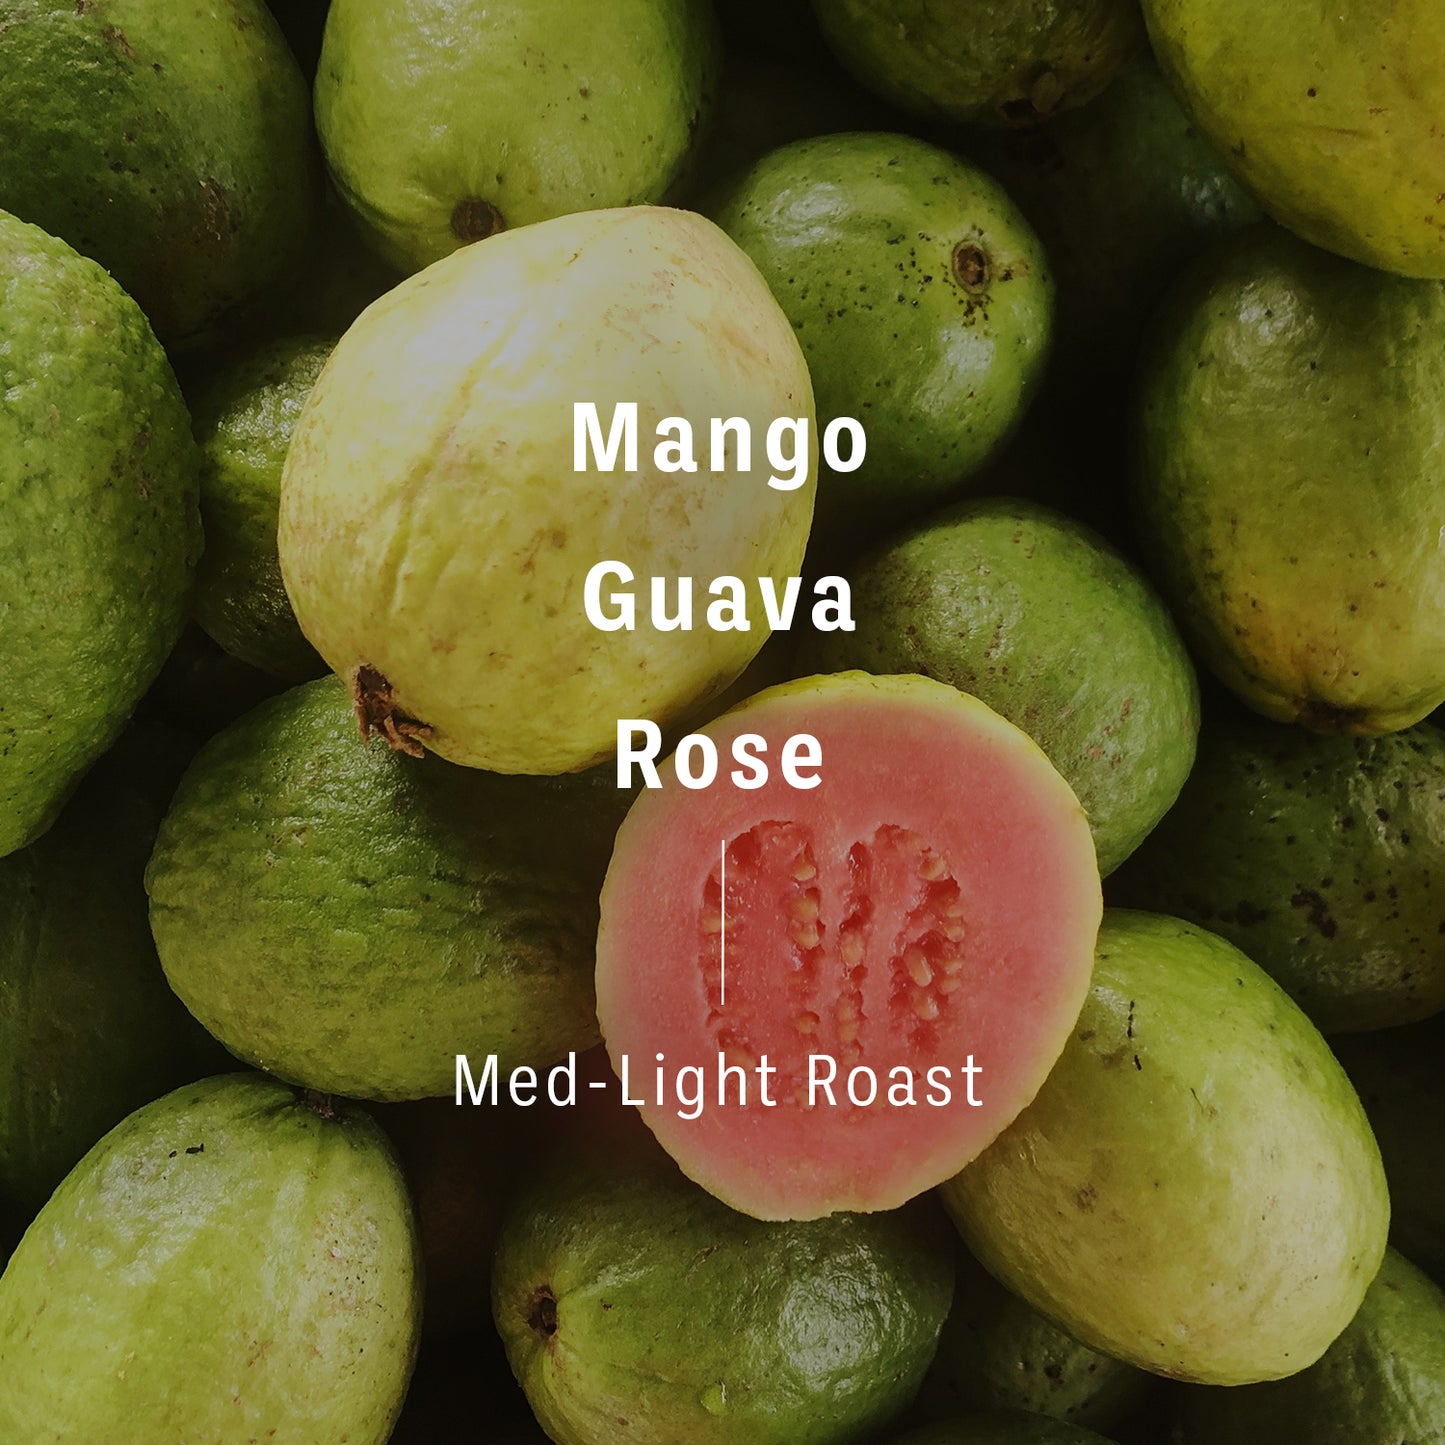 Flavor notes and roast level of Colombia Carbonic Macerated coffee beans imposed on background of guavas. Text reads, “Mango, Guava, Rose, med-light roast," 2 of 4.